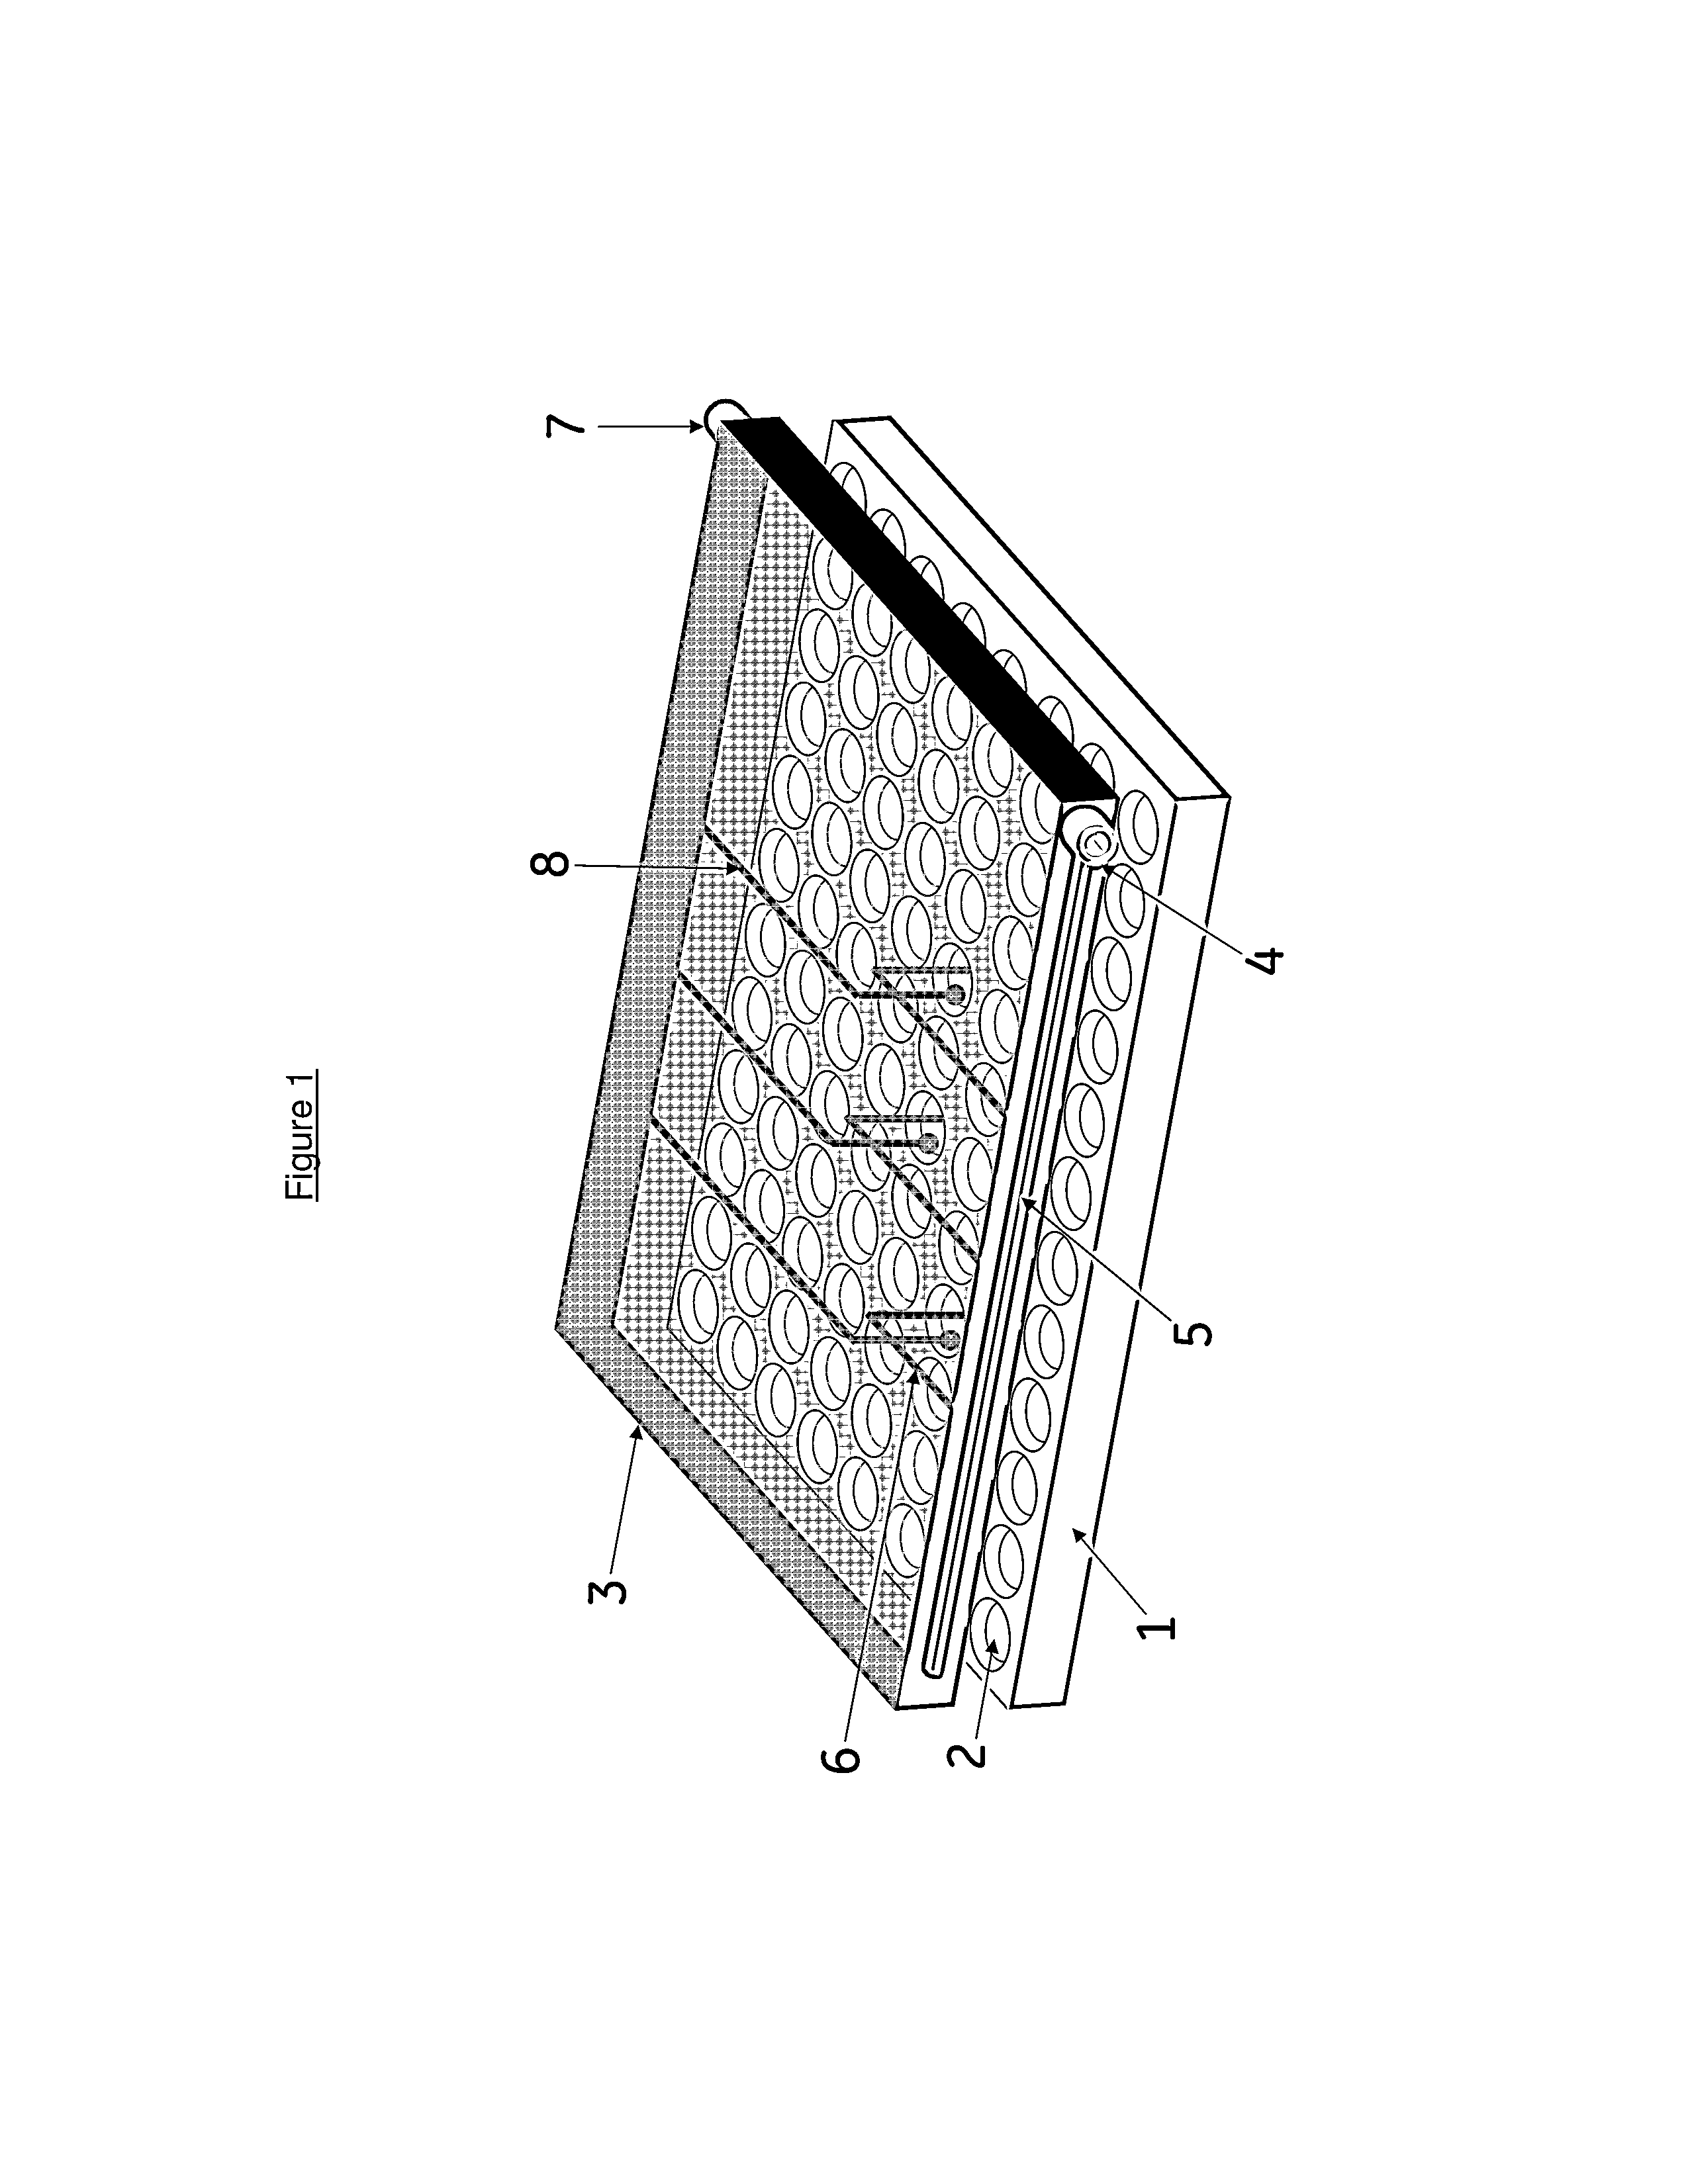 Apparatus and method for detecting DNA damage